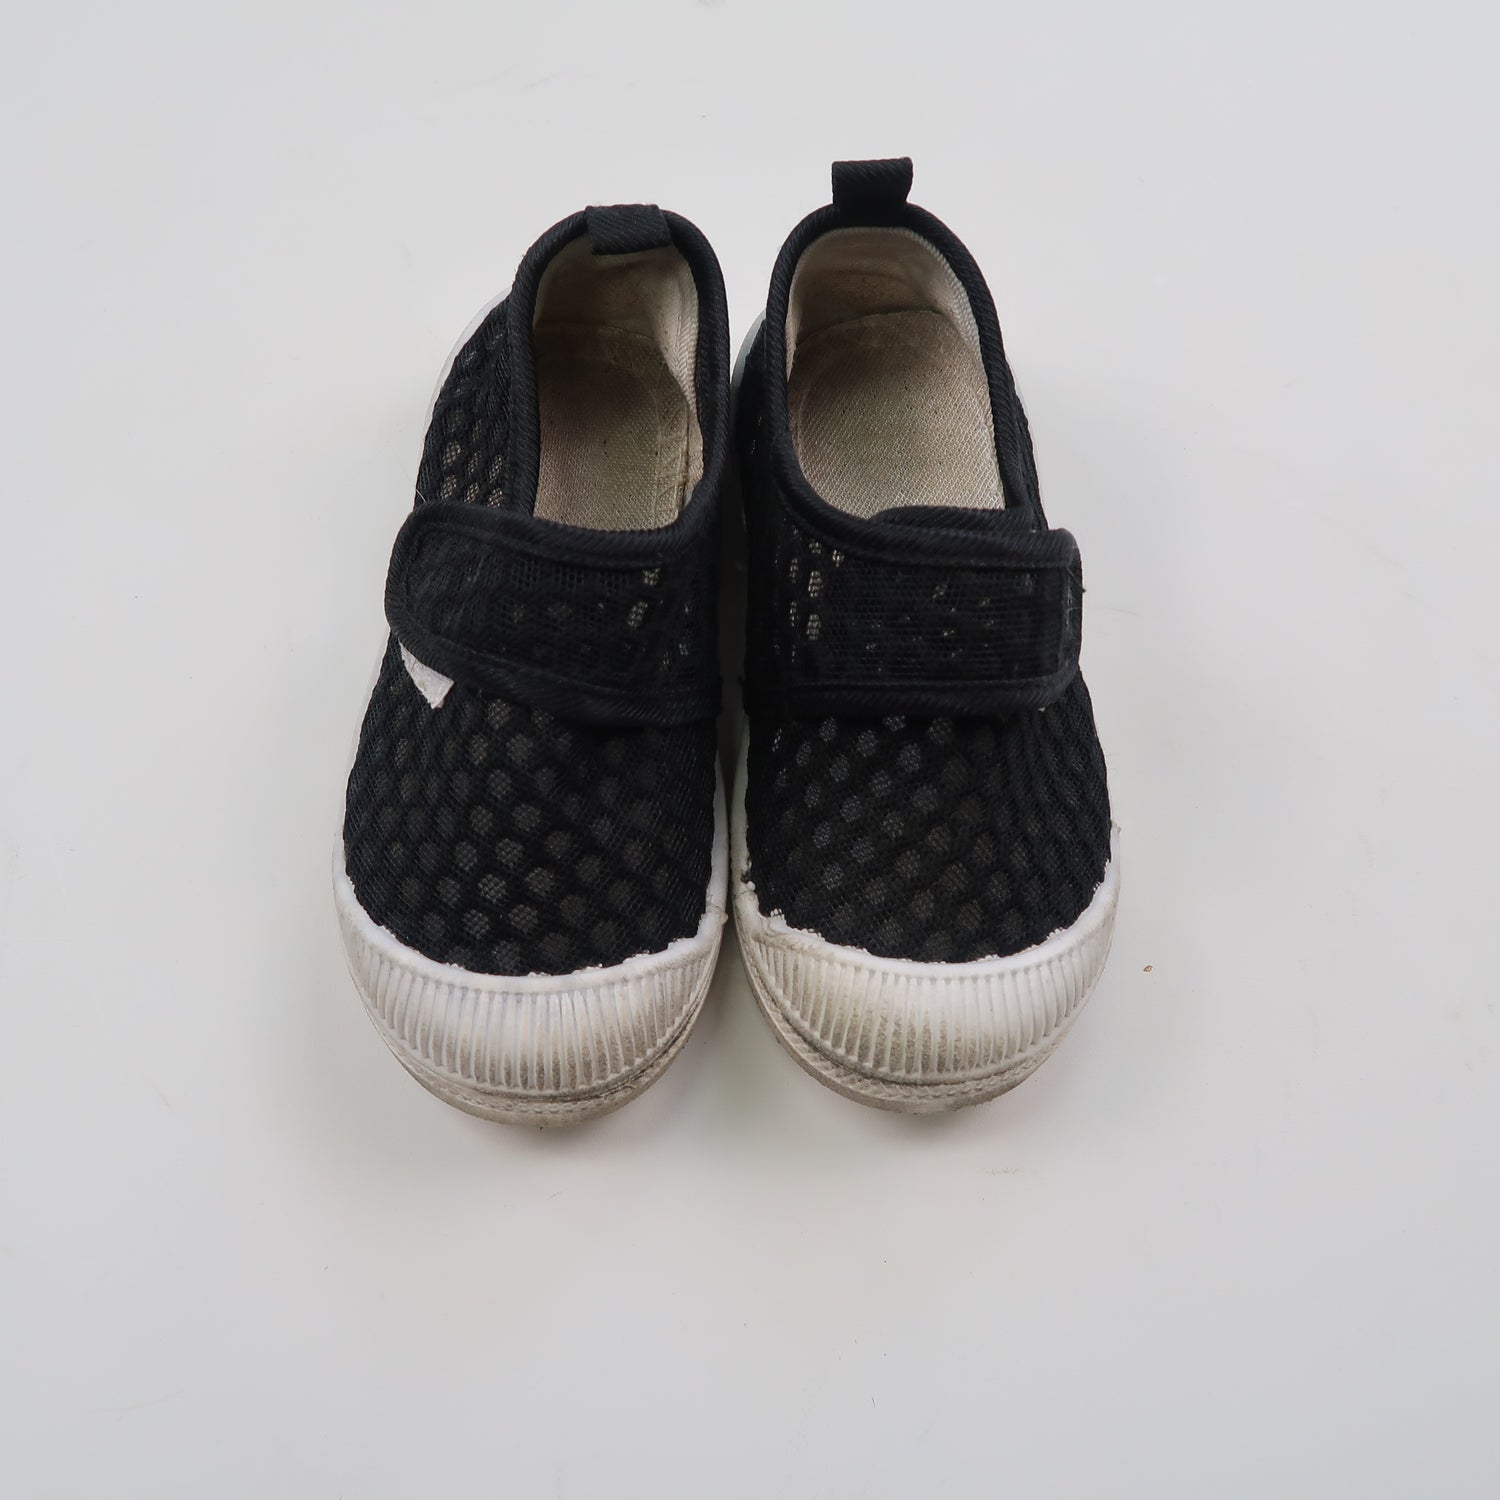 Unknown Brand - Shoes (Shoes - 8/9)